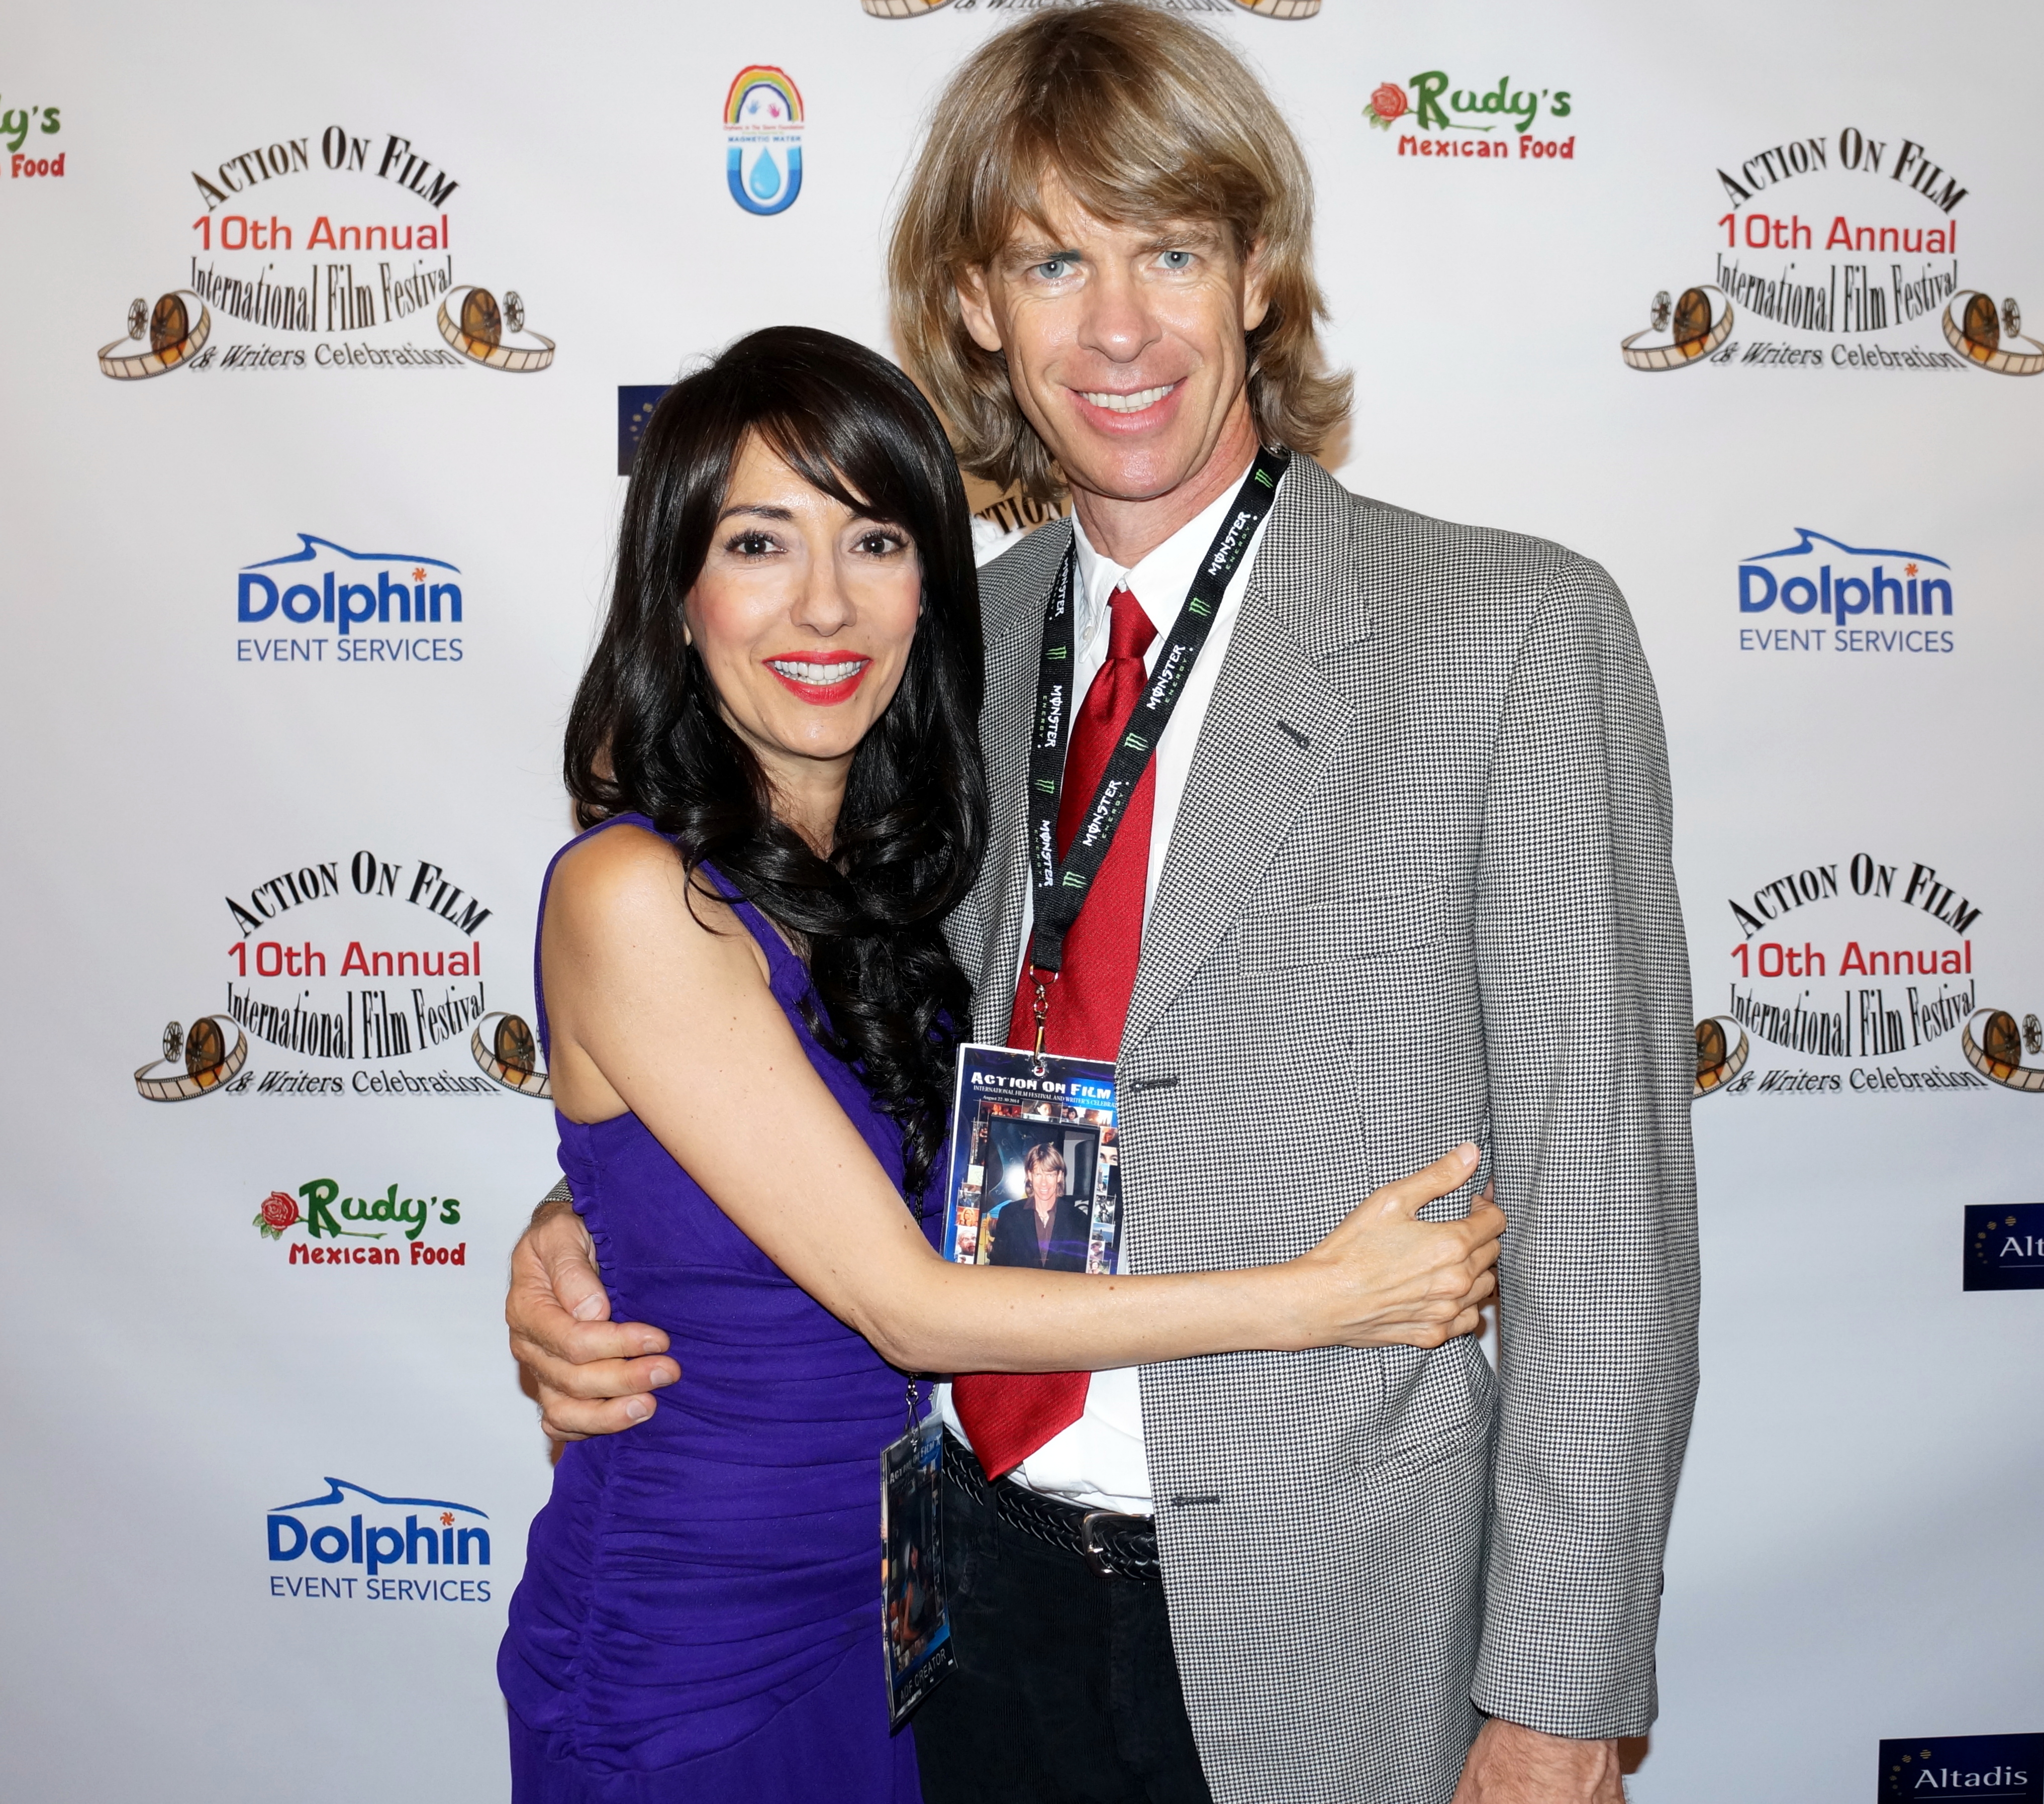 Luciana Lagana and her husband, actor/screenwriter Gregory Graham, at their official selections screenings at the Action on Film International Film Festival on 8/25/14